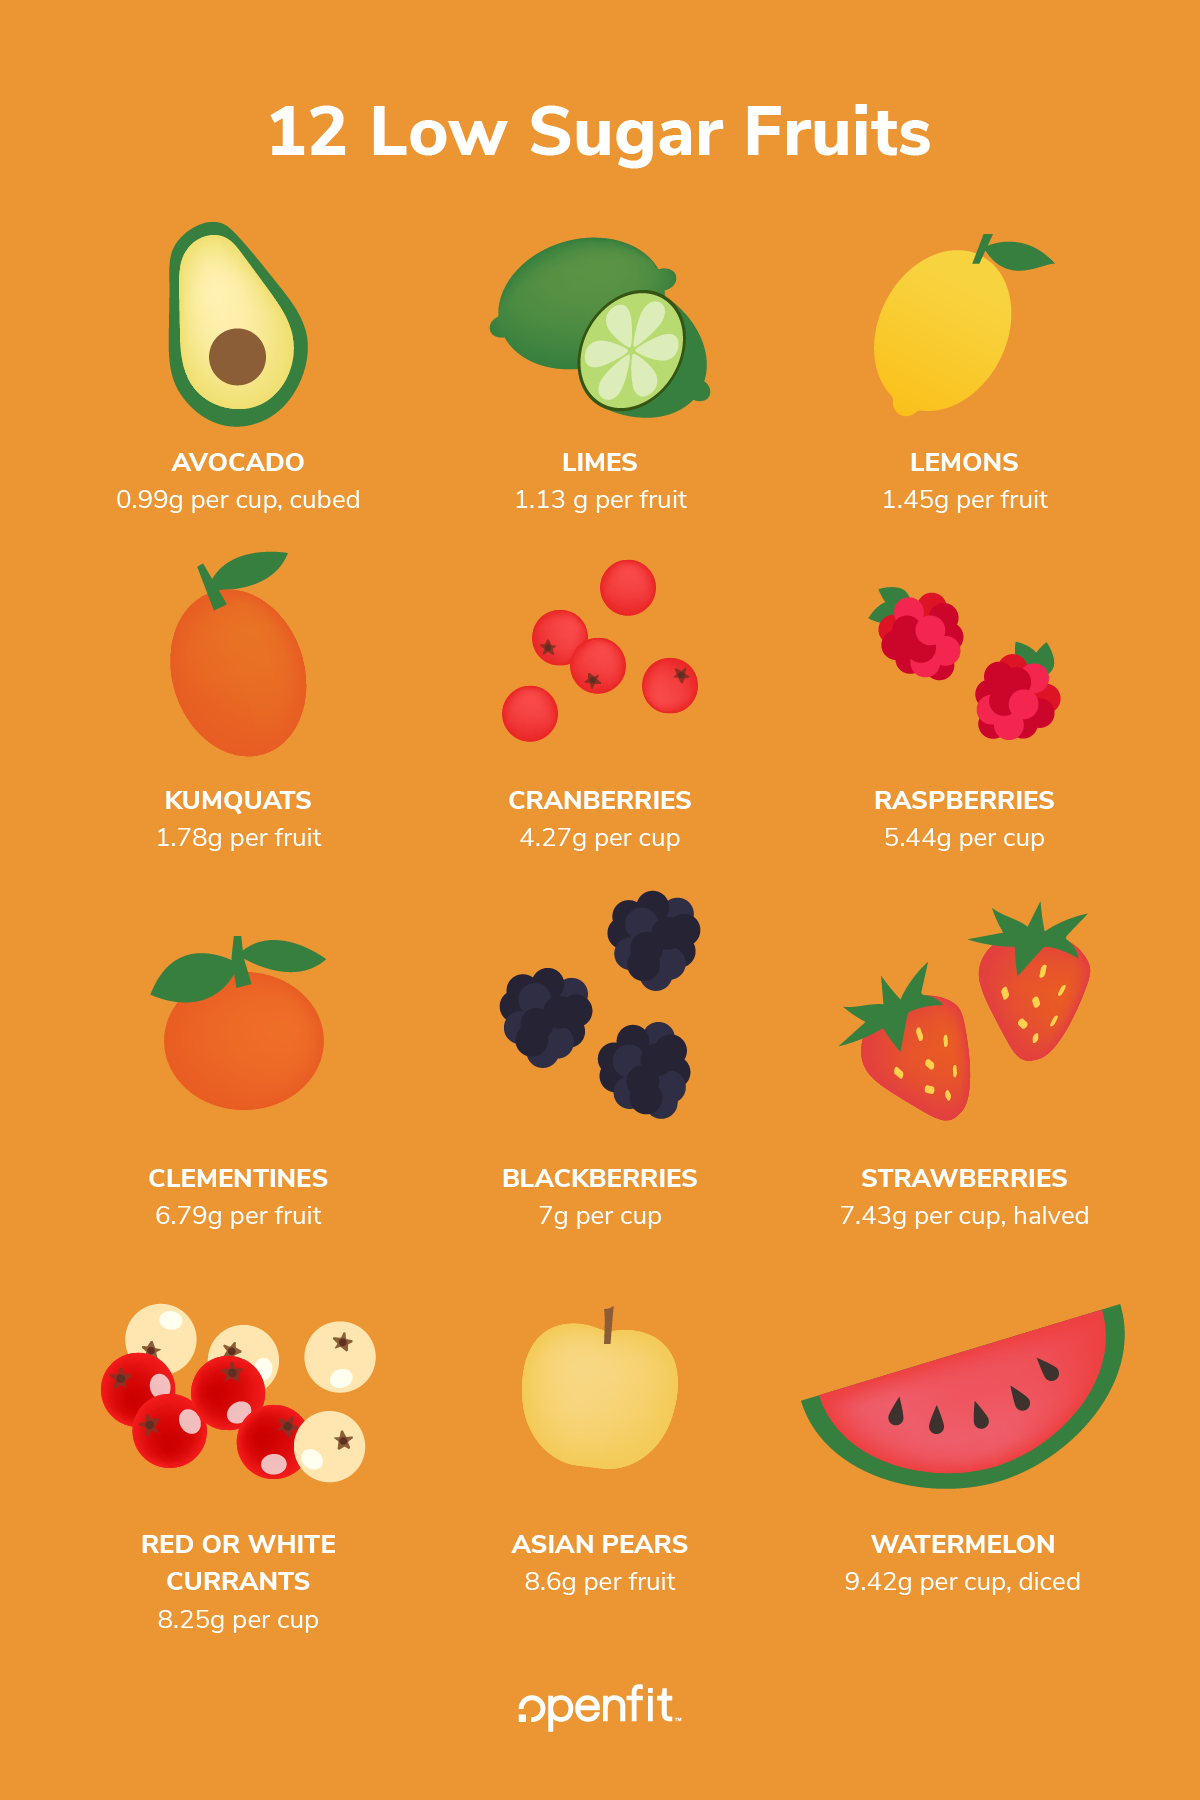 12 Low Sugar Fruits to Enjoy Including Berries, Limes, and ...